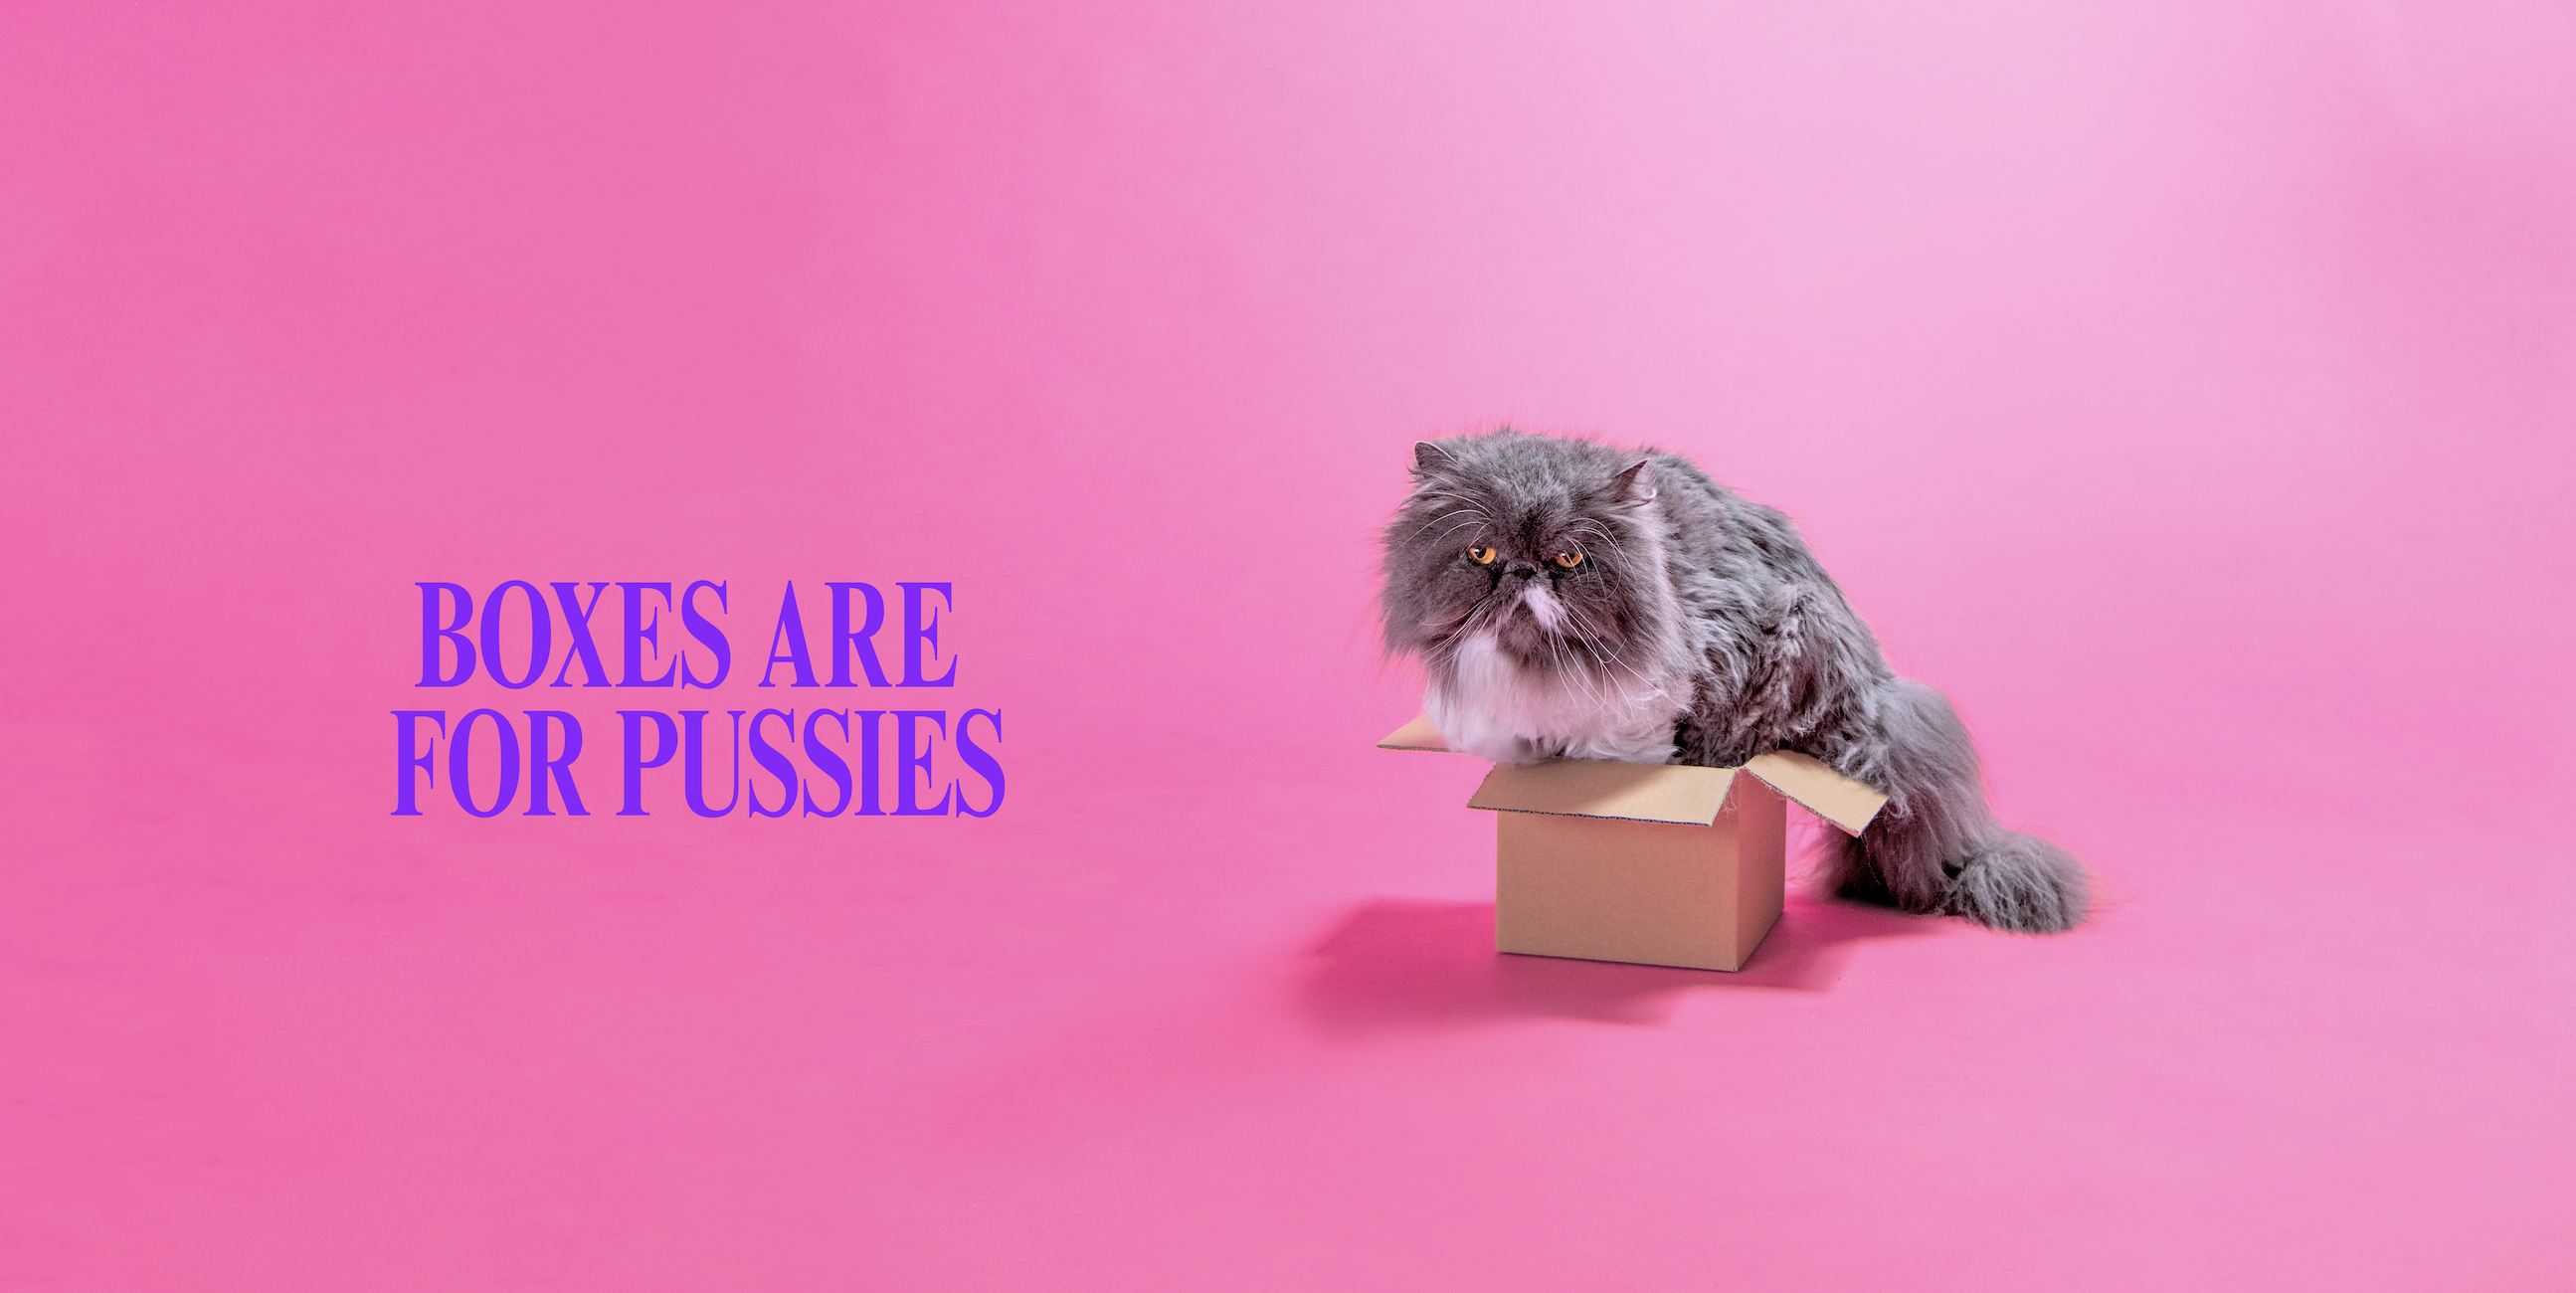 Boxes are for pussies